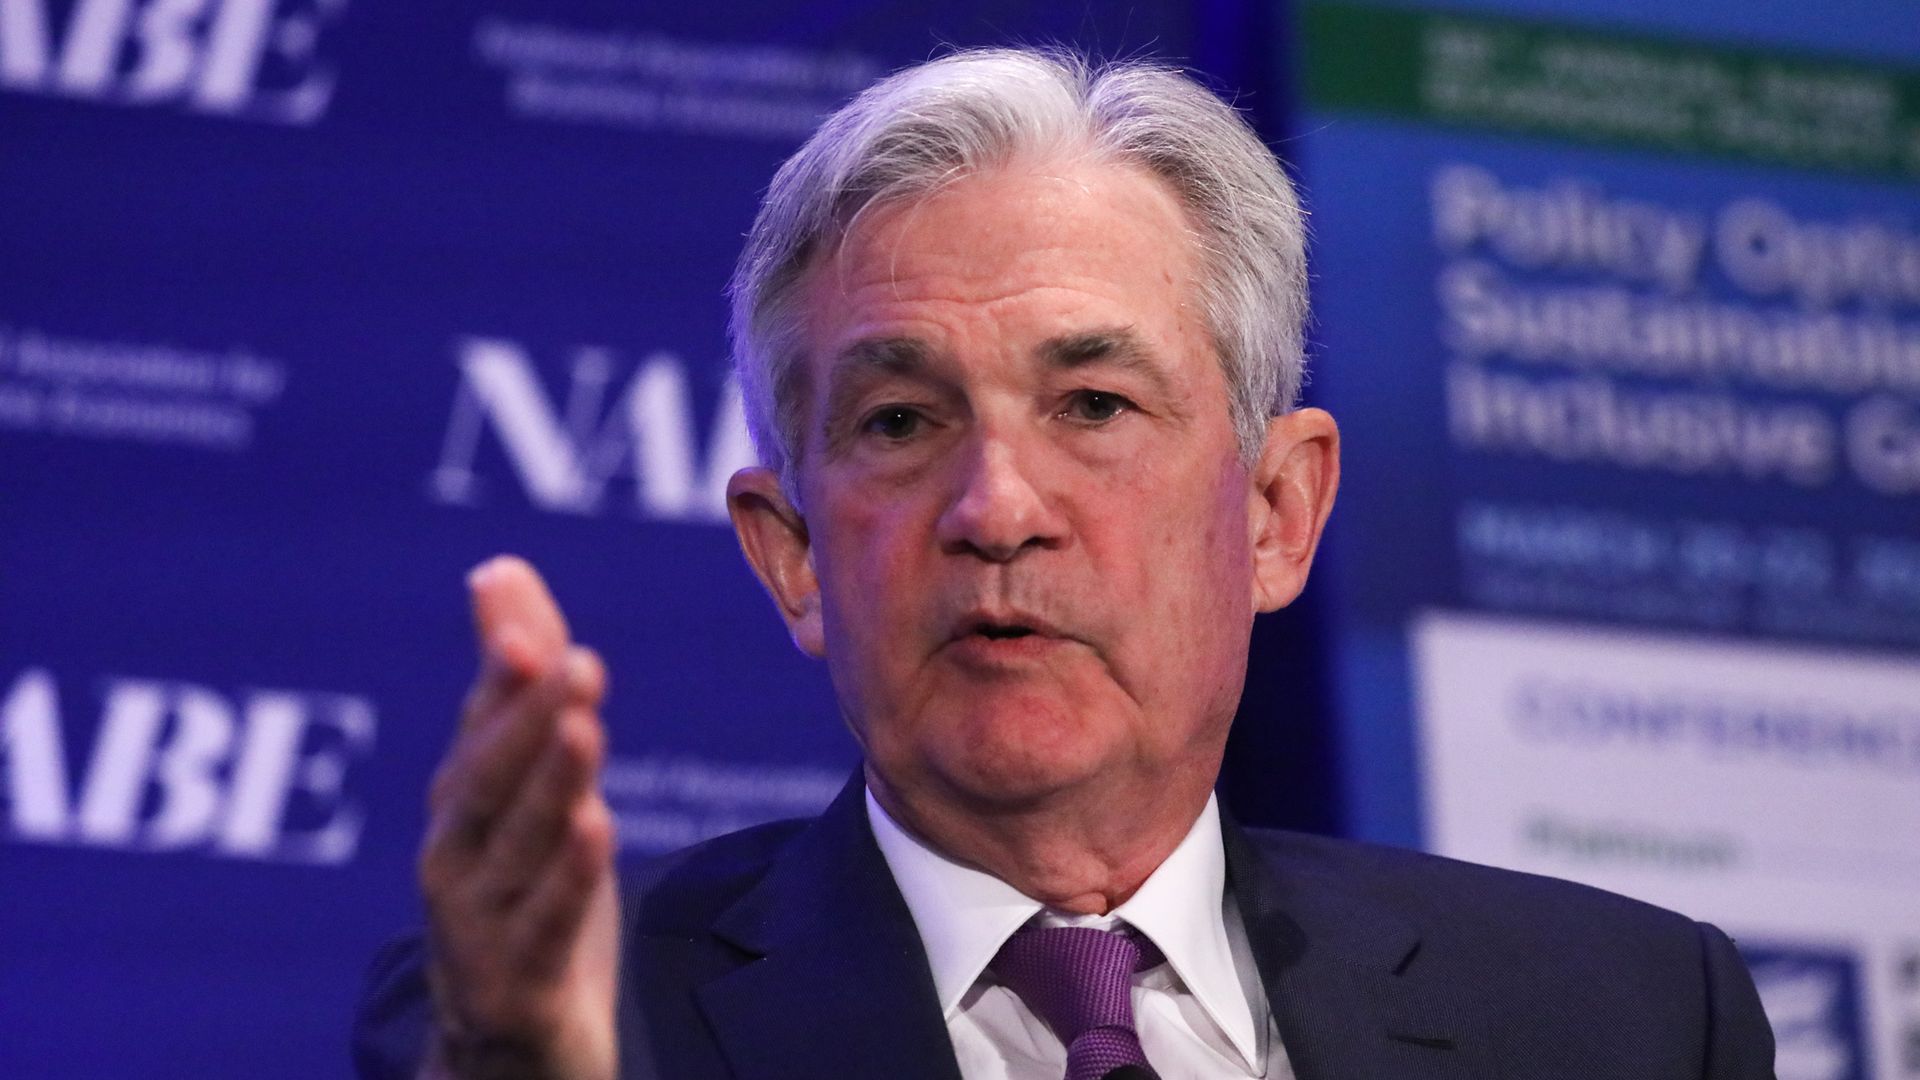 Jerome Powell, Chairman of the U.S. Federal Reserve, speaks during the National Association of Business Economics (NABE) economic policy conference in Washington, D.C, 